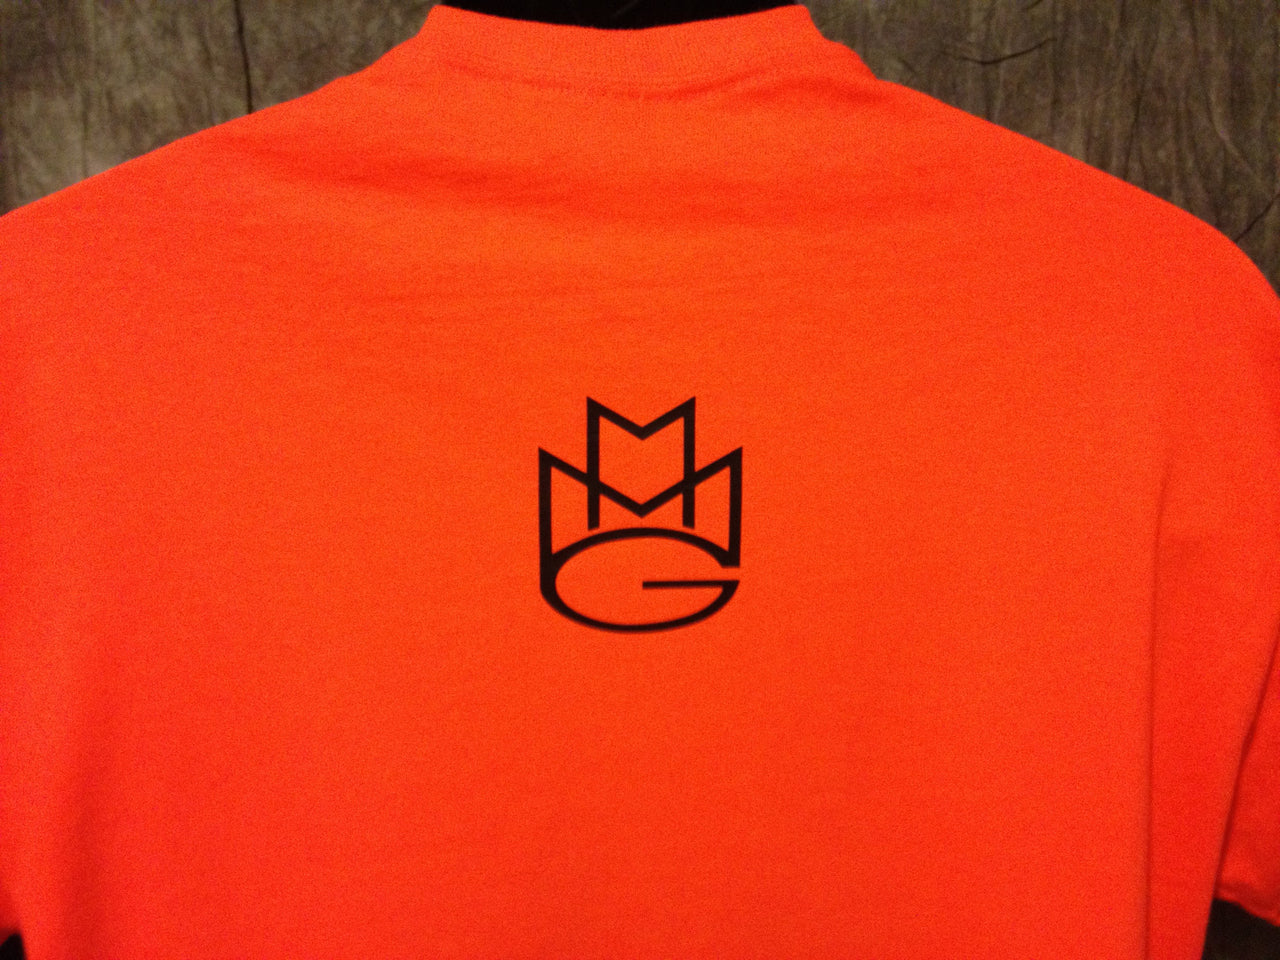 Maybach Music Group Limited Edition Tshirt: Orange with White and Black Print - TshirtNow.net - 4